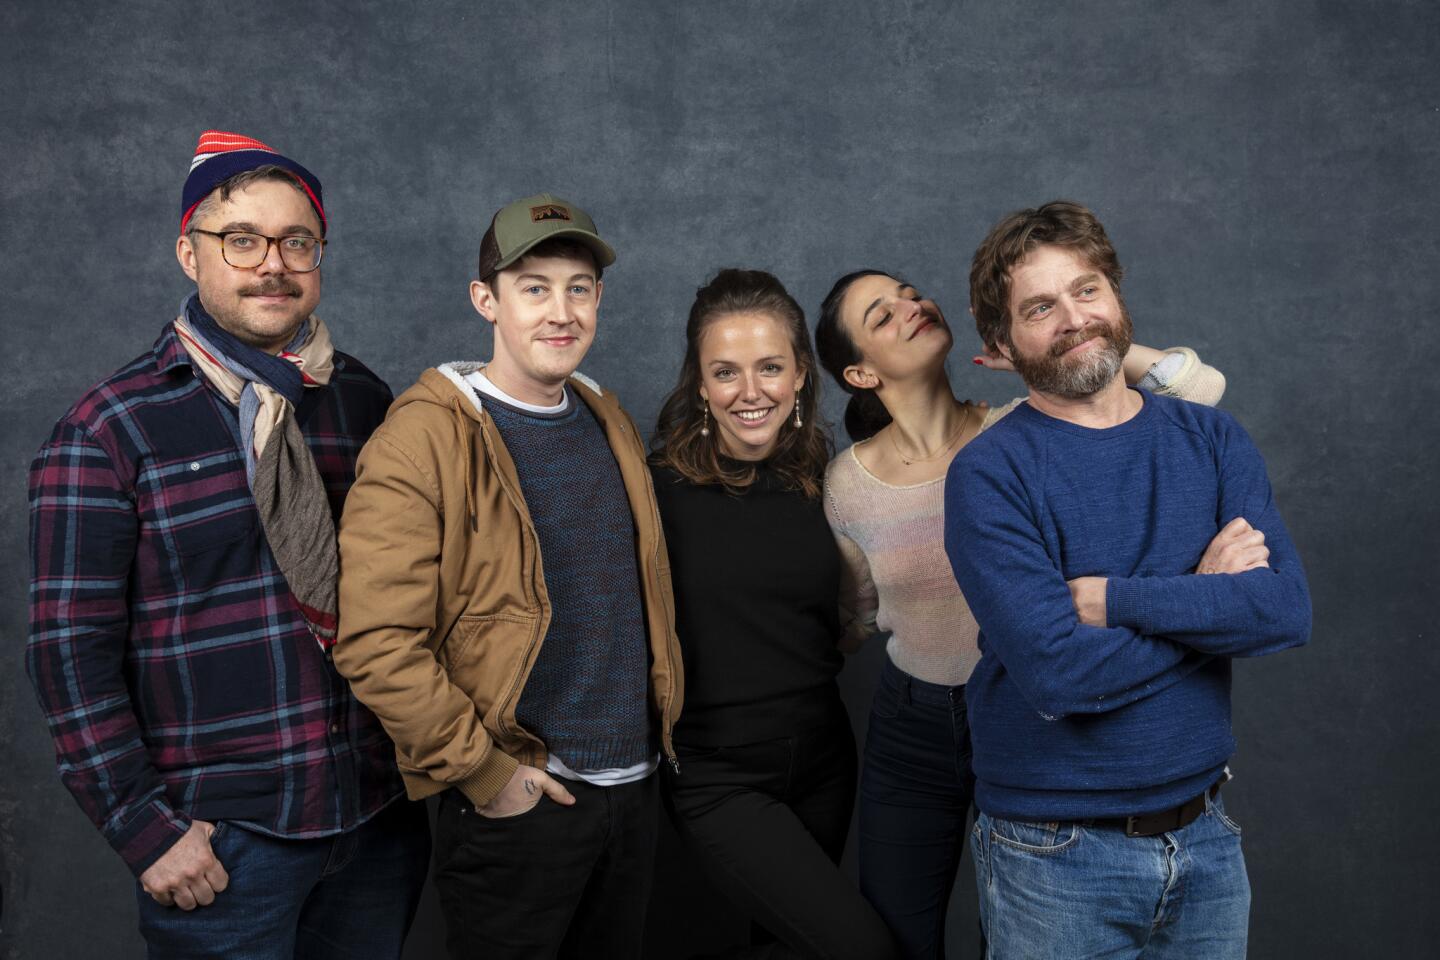 Director David Wnendt, left, actor Alex Sharp, screenwriter Rebecca Dinerstein and actors Jenny Slate and Zach Galifianakis from the film, "The Sunlit Night."